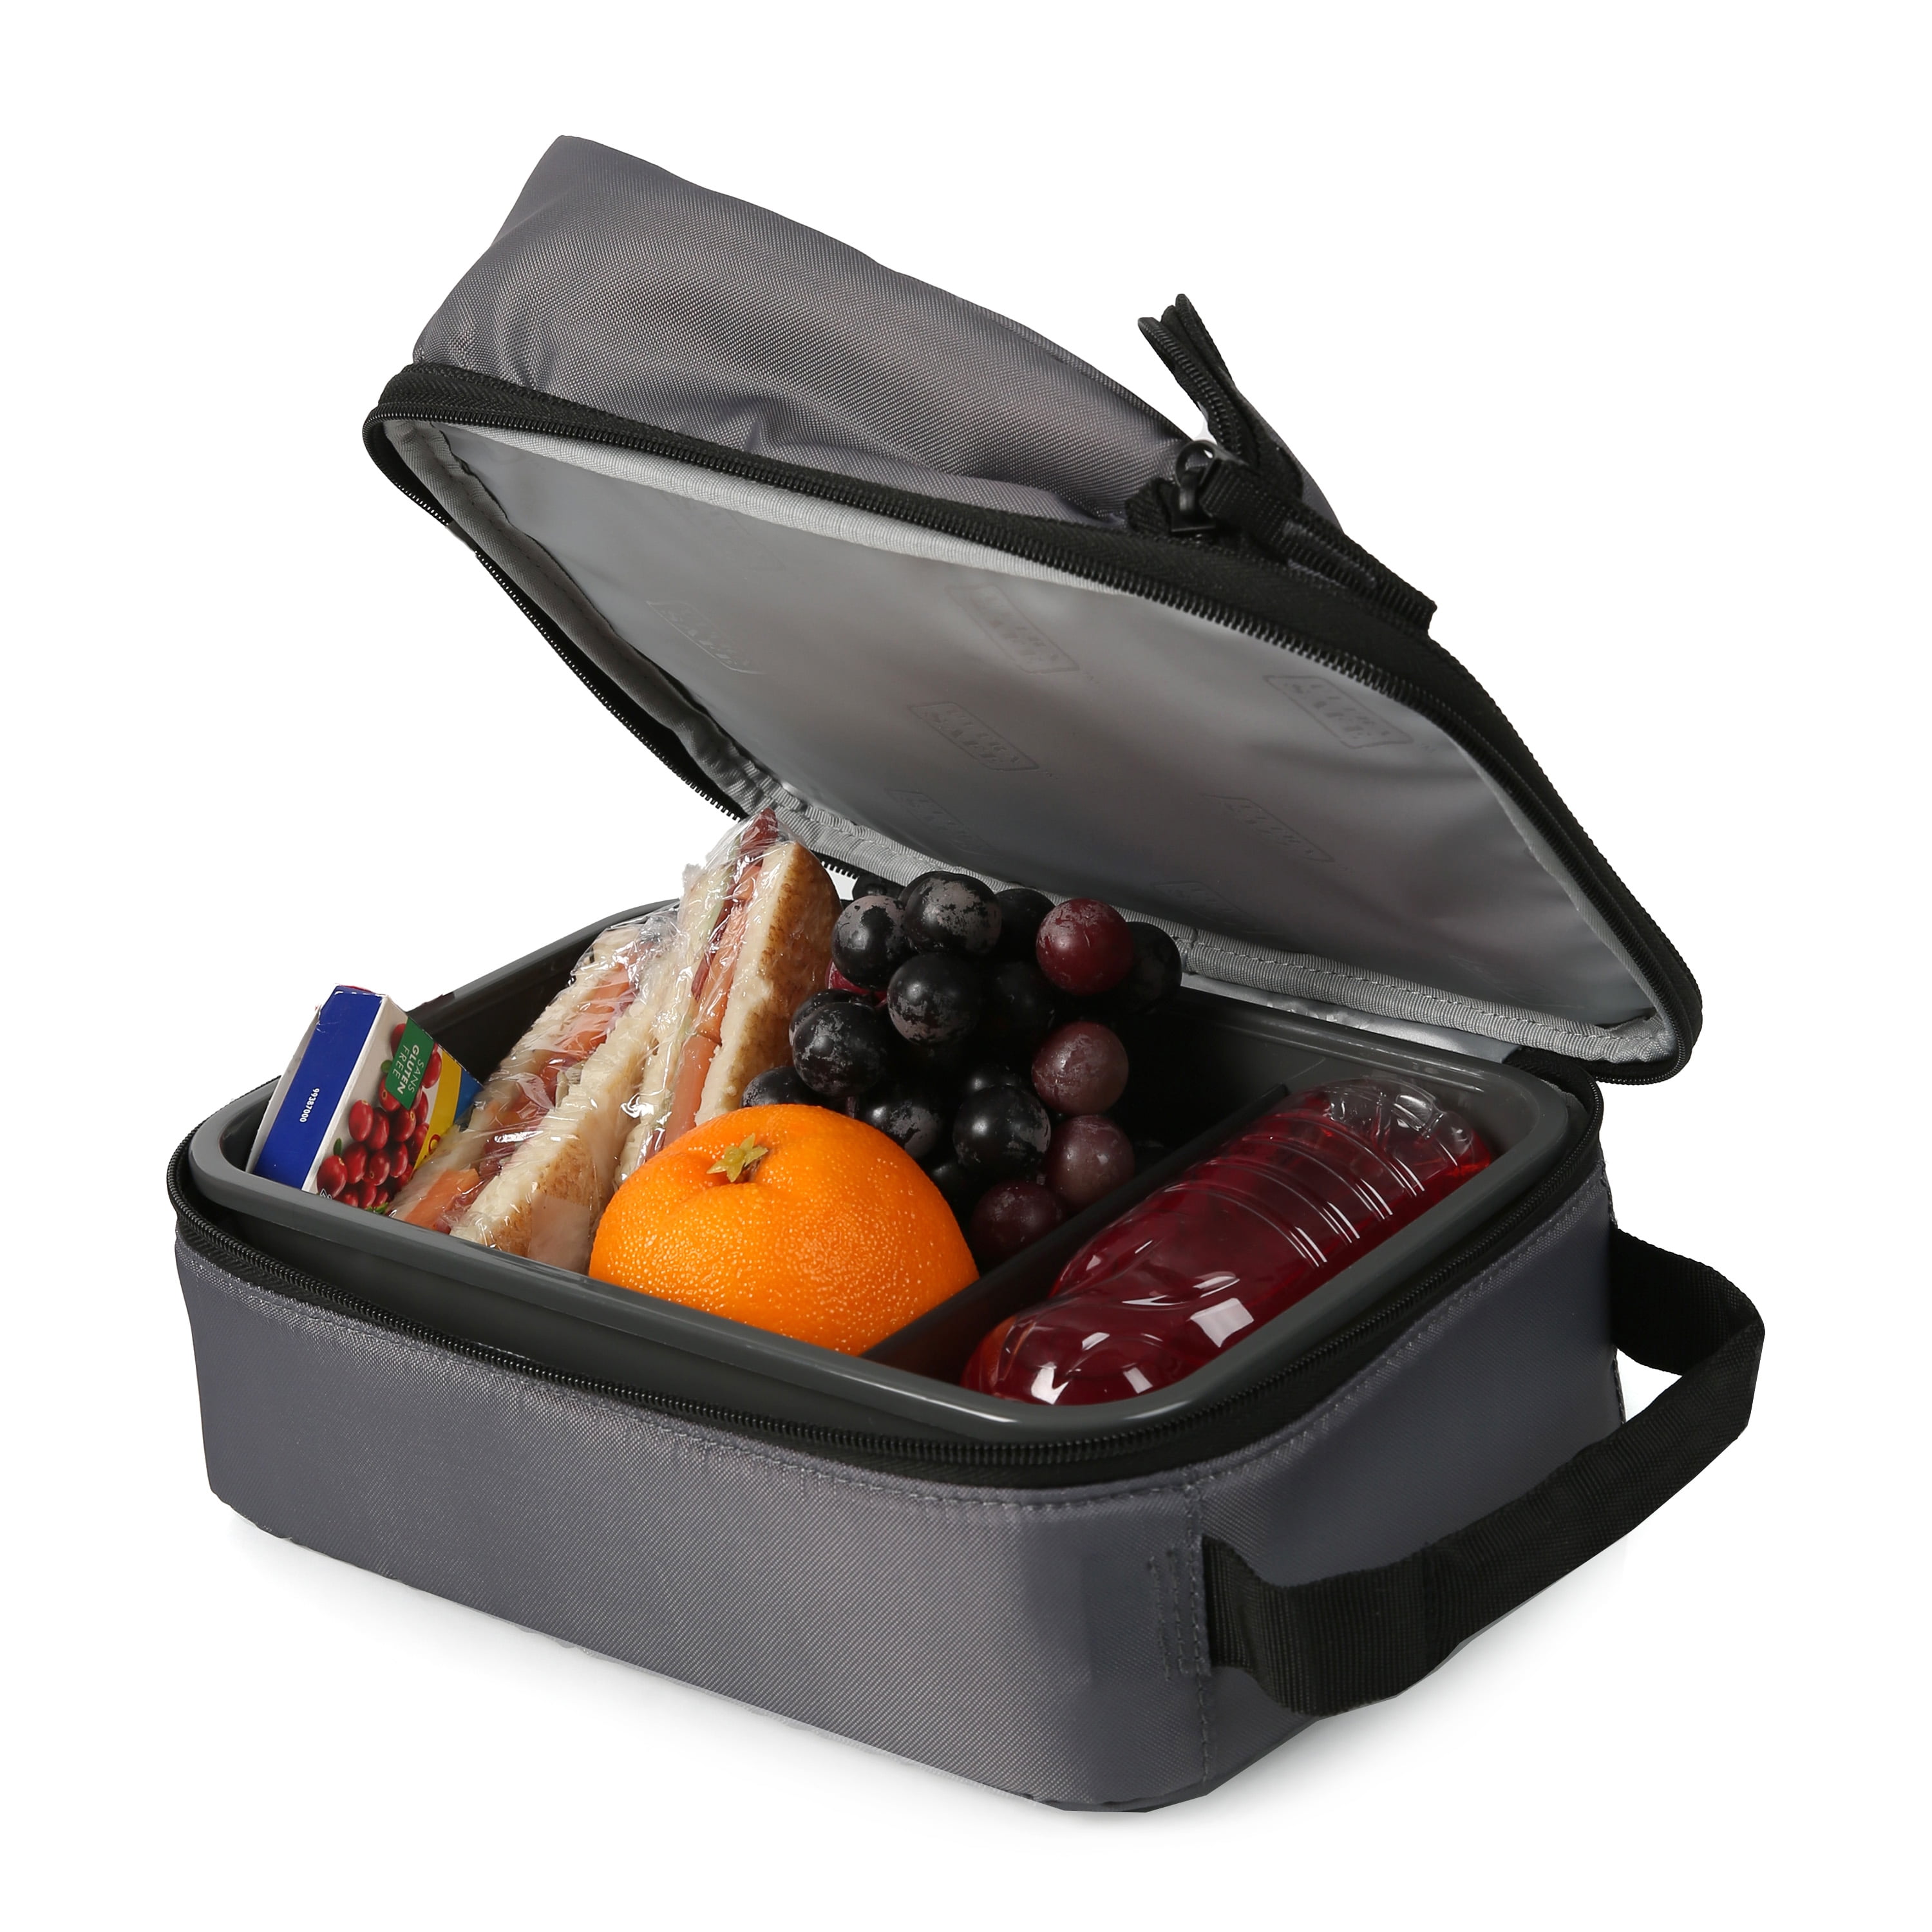 where can I find a lunch box hard liner? I have a lunchbox that doesn't  have one that needs one to stay standing. : r/wherecanibuythis